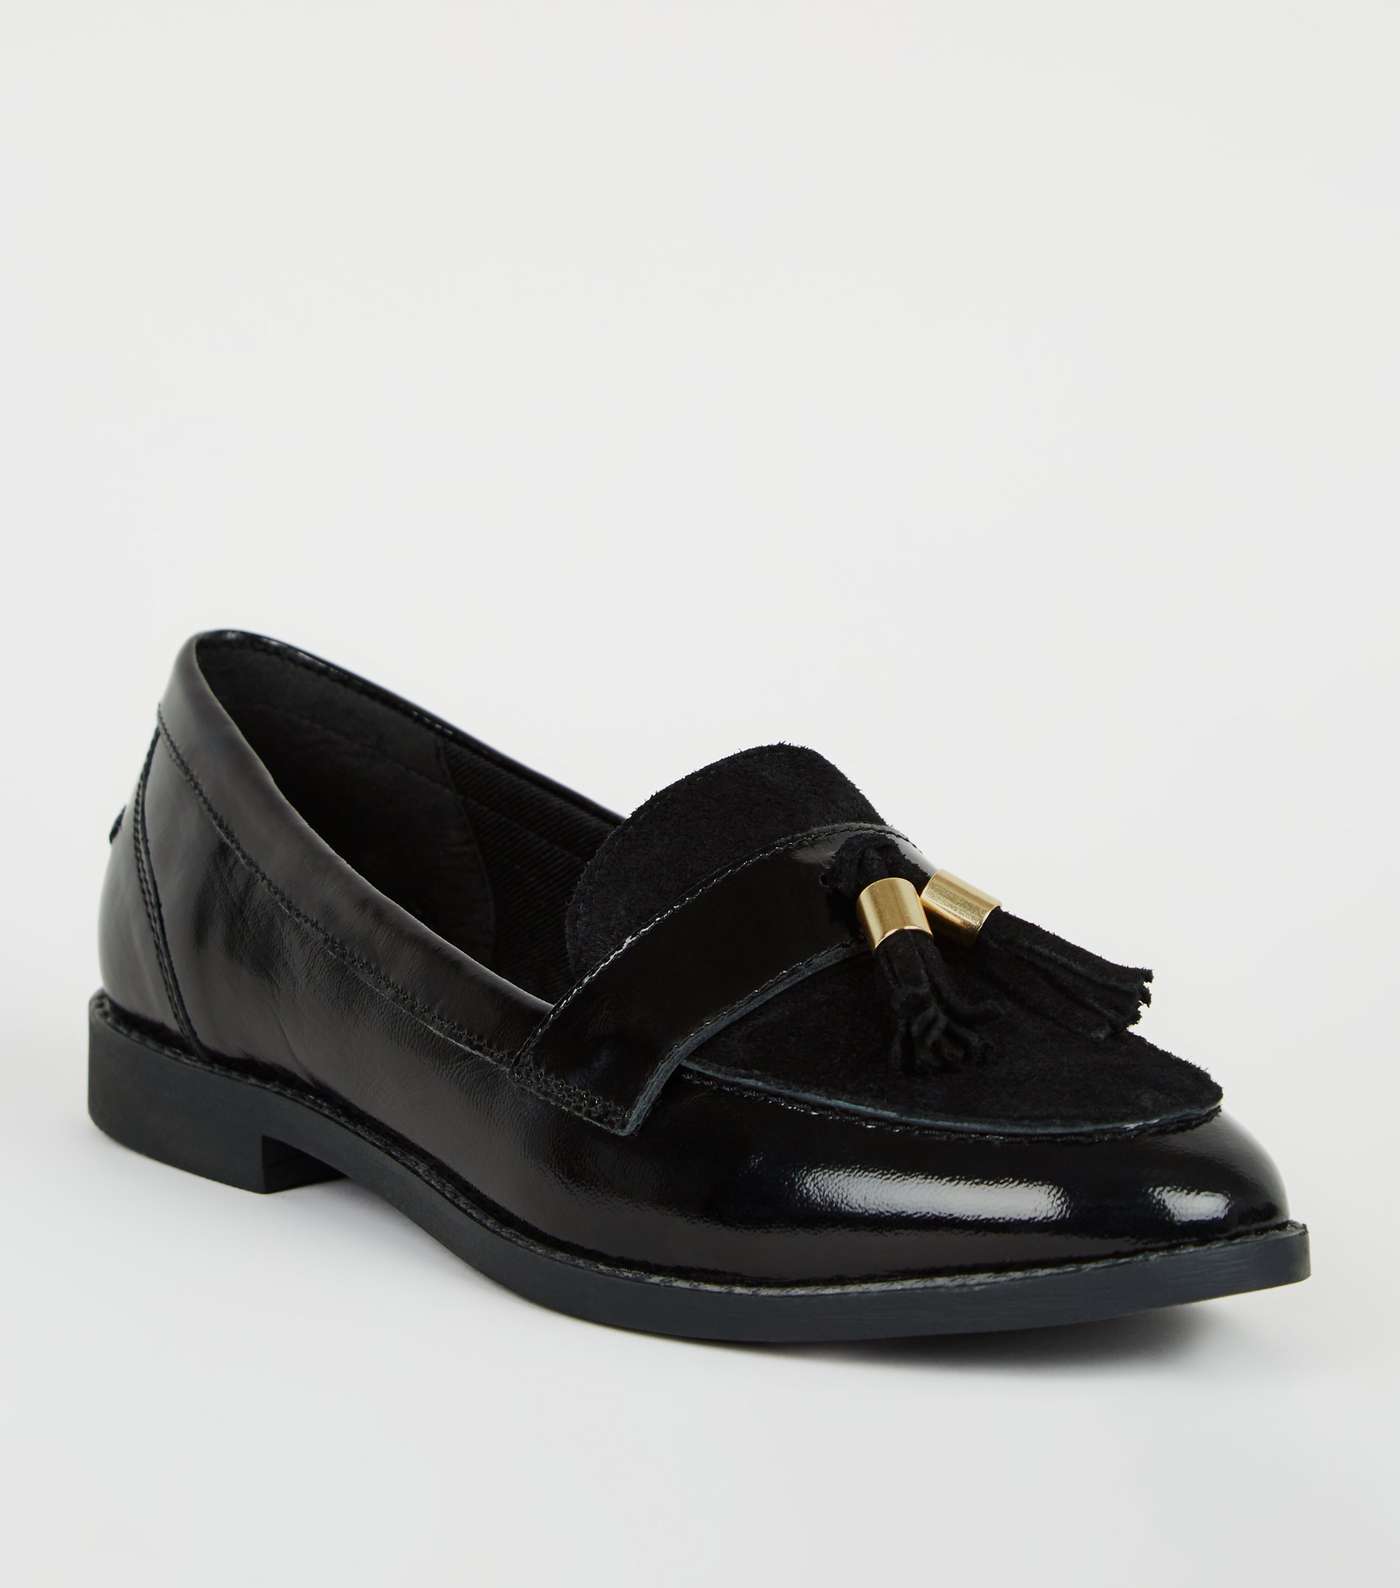 Black Suede and Leather Tassel Trim Loafers